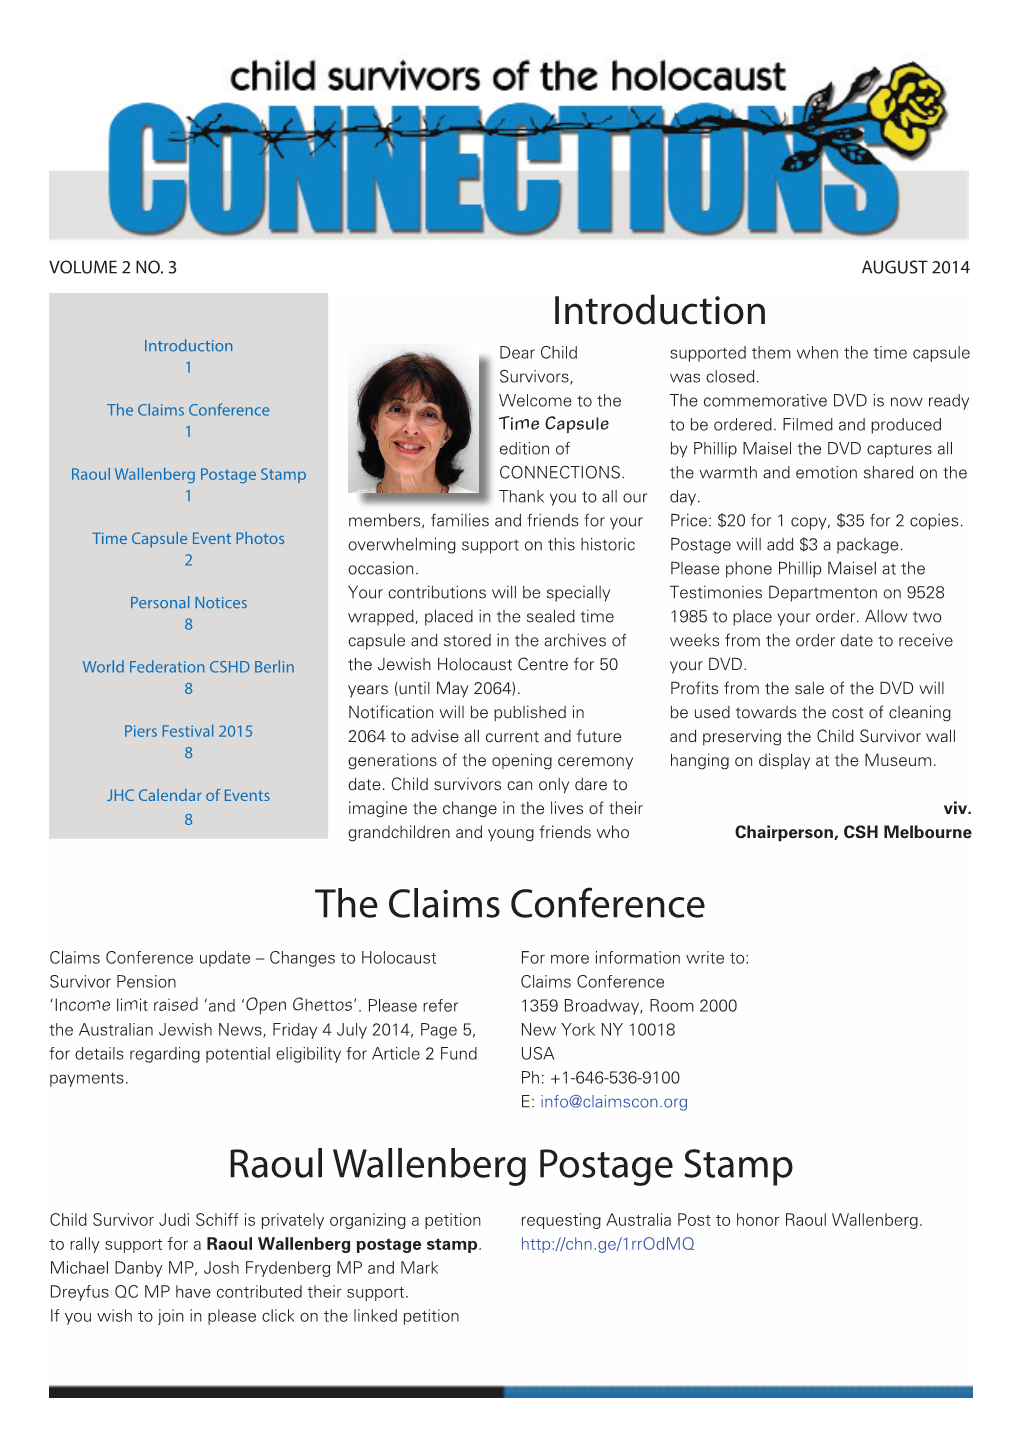 Introduction the Claims Conference Raoul Wallenberg Postage Stamp